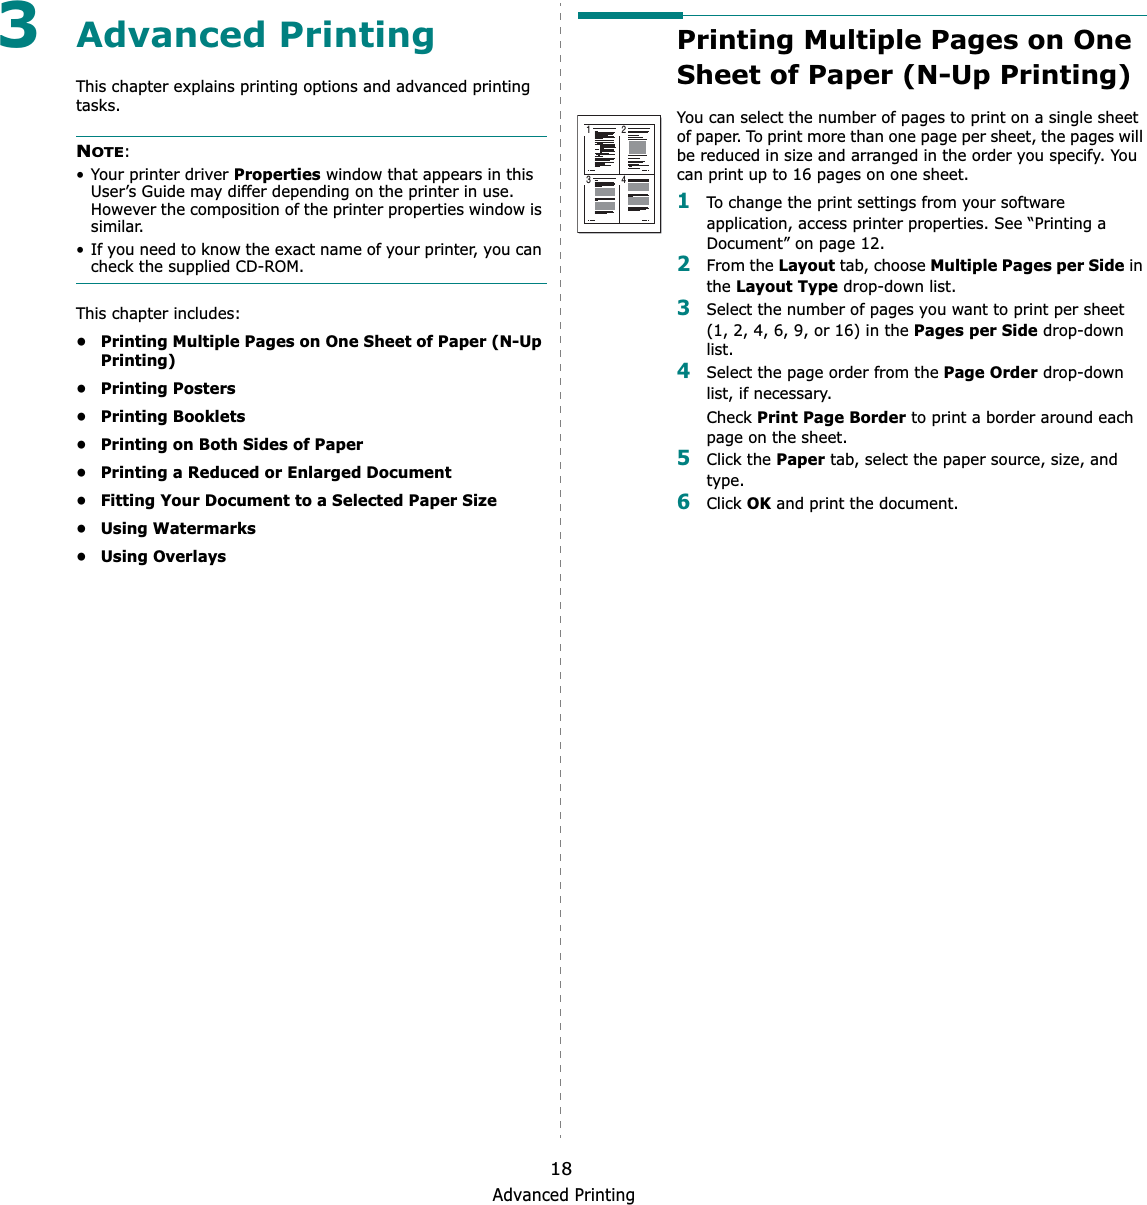 Advanced Printing183Advanced PrintingThis chapter explains printing options and advanced printing tasks. NOTE:• Your printer driver Properties window that appears in this User’s Guide may differ depending on the printer in use. However the composition of the printer properties window is similar.• If you need to know the exact name of your printer, you can check the supplied CD-ROM.This chapter includes:• Printing Multiple Pages on One Sheet of Paper (N-Up Printing)• Printing Posters• Printing Booklets• Printing on Both Sides of Paper• Printing a Reduced or Enlarged Document• Fitting Your Document to a Selected Paper Size• Using Watermarks• Using OverlaysPrinting Multiple Pages on One Sheet of Paper (N-Up Printing) You can select the number of pages to print on a single sheet of paper. To print more than one page per sheet, the pages will be reduced in size and arranged in the order you specify. You can print up to 16 pages on one sheet.  1To change the print settings from your software application, access printer properties. See “Printing a Document” on page 12.2From the Layout tab, choose Multiple Pages per Side in the Layout Type drop-down list. 3Select the number of pages you want to print per sheet (1, 2, 4, 6, 9, or 16) in the Pages per Side drop-down list.4Select the page order from the Page Order drop-down list, if necessary.Check Print Page Border to print a border around each page on the sheet. 5Click the Paper tab, select the paper source, size, and type.6Click OK and print the document. 1 23 4